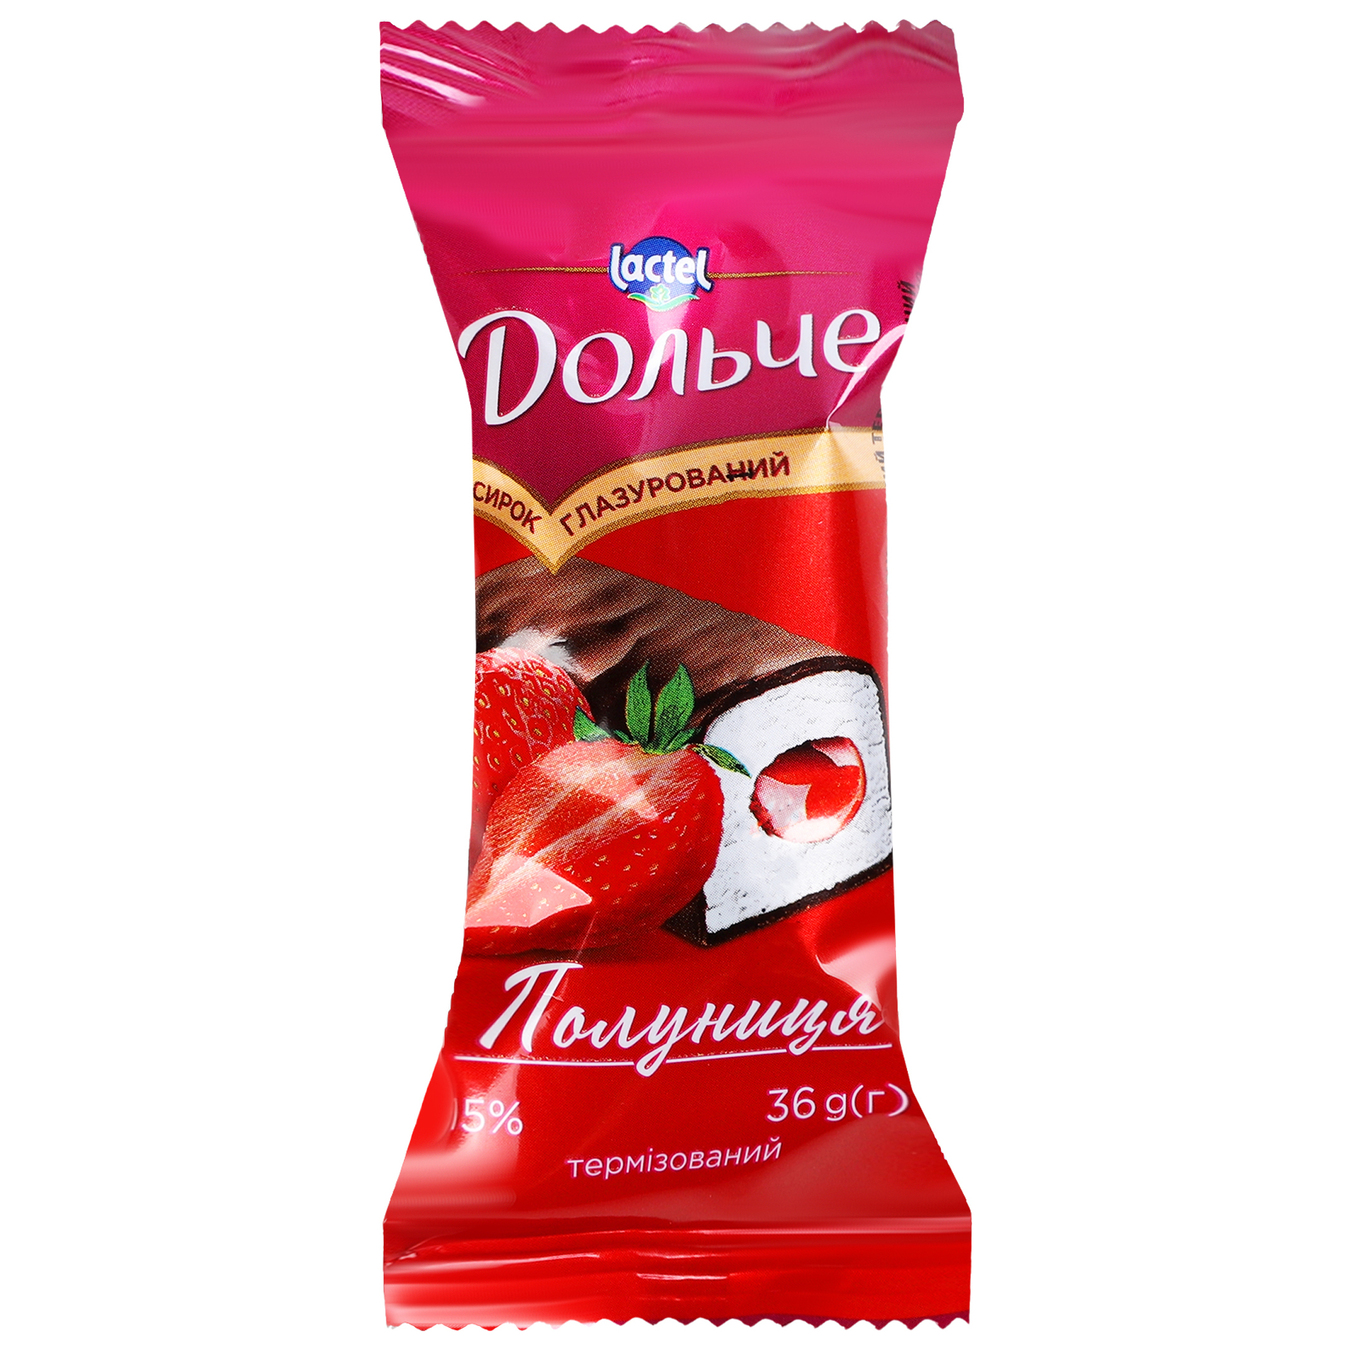 Dolce Glazed Curd Snack with Strawberry Filling 15% 36g